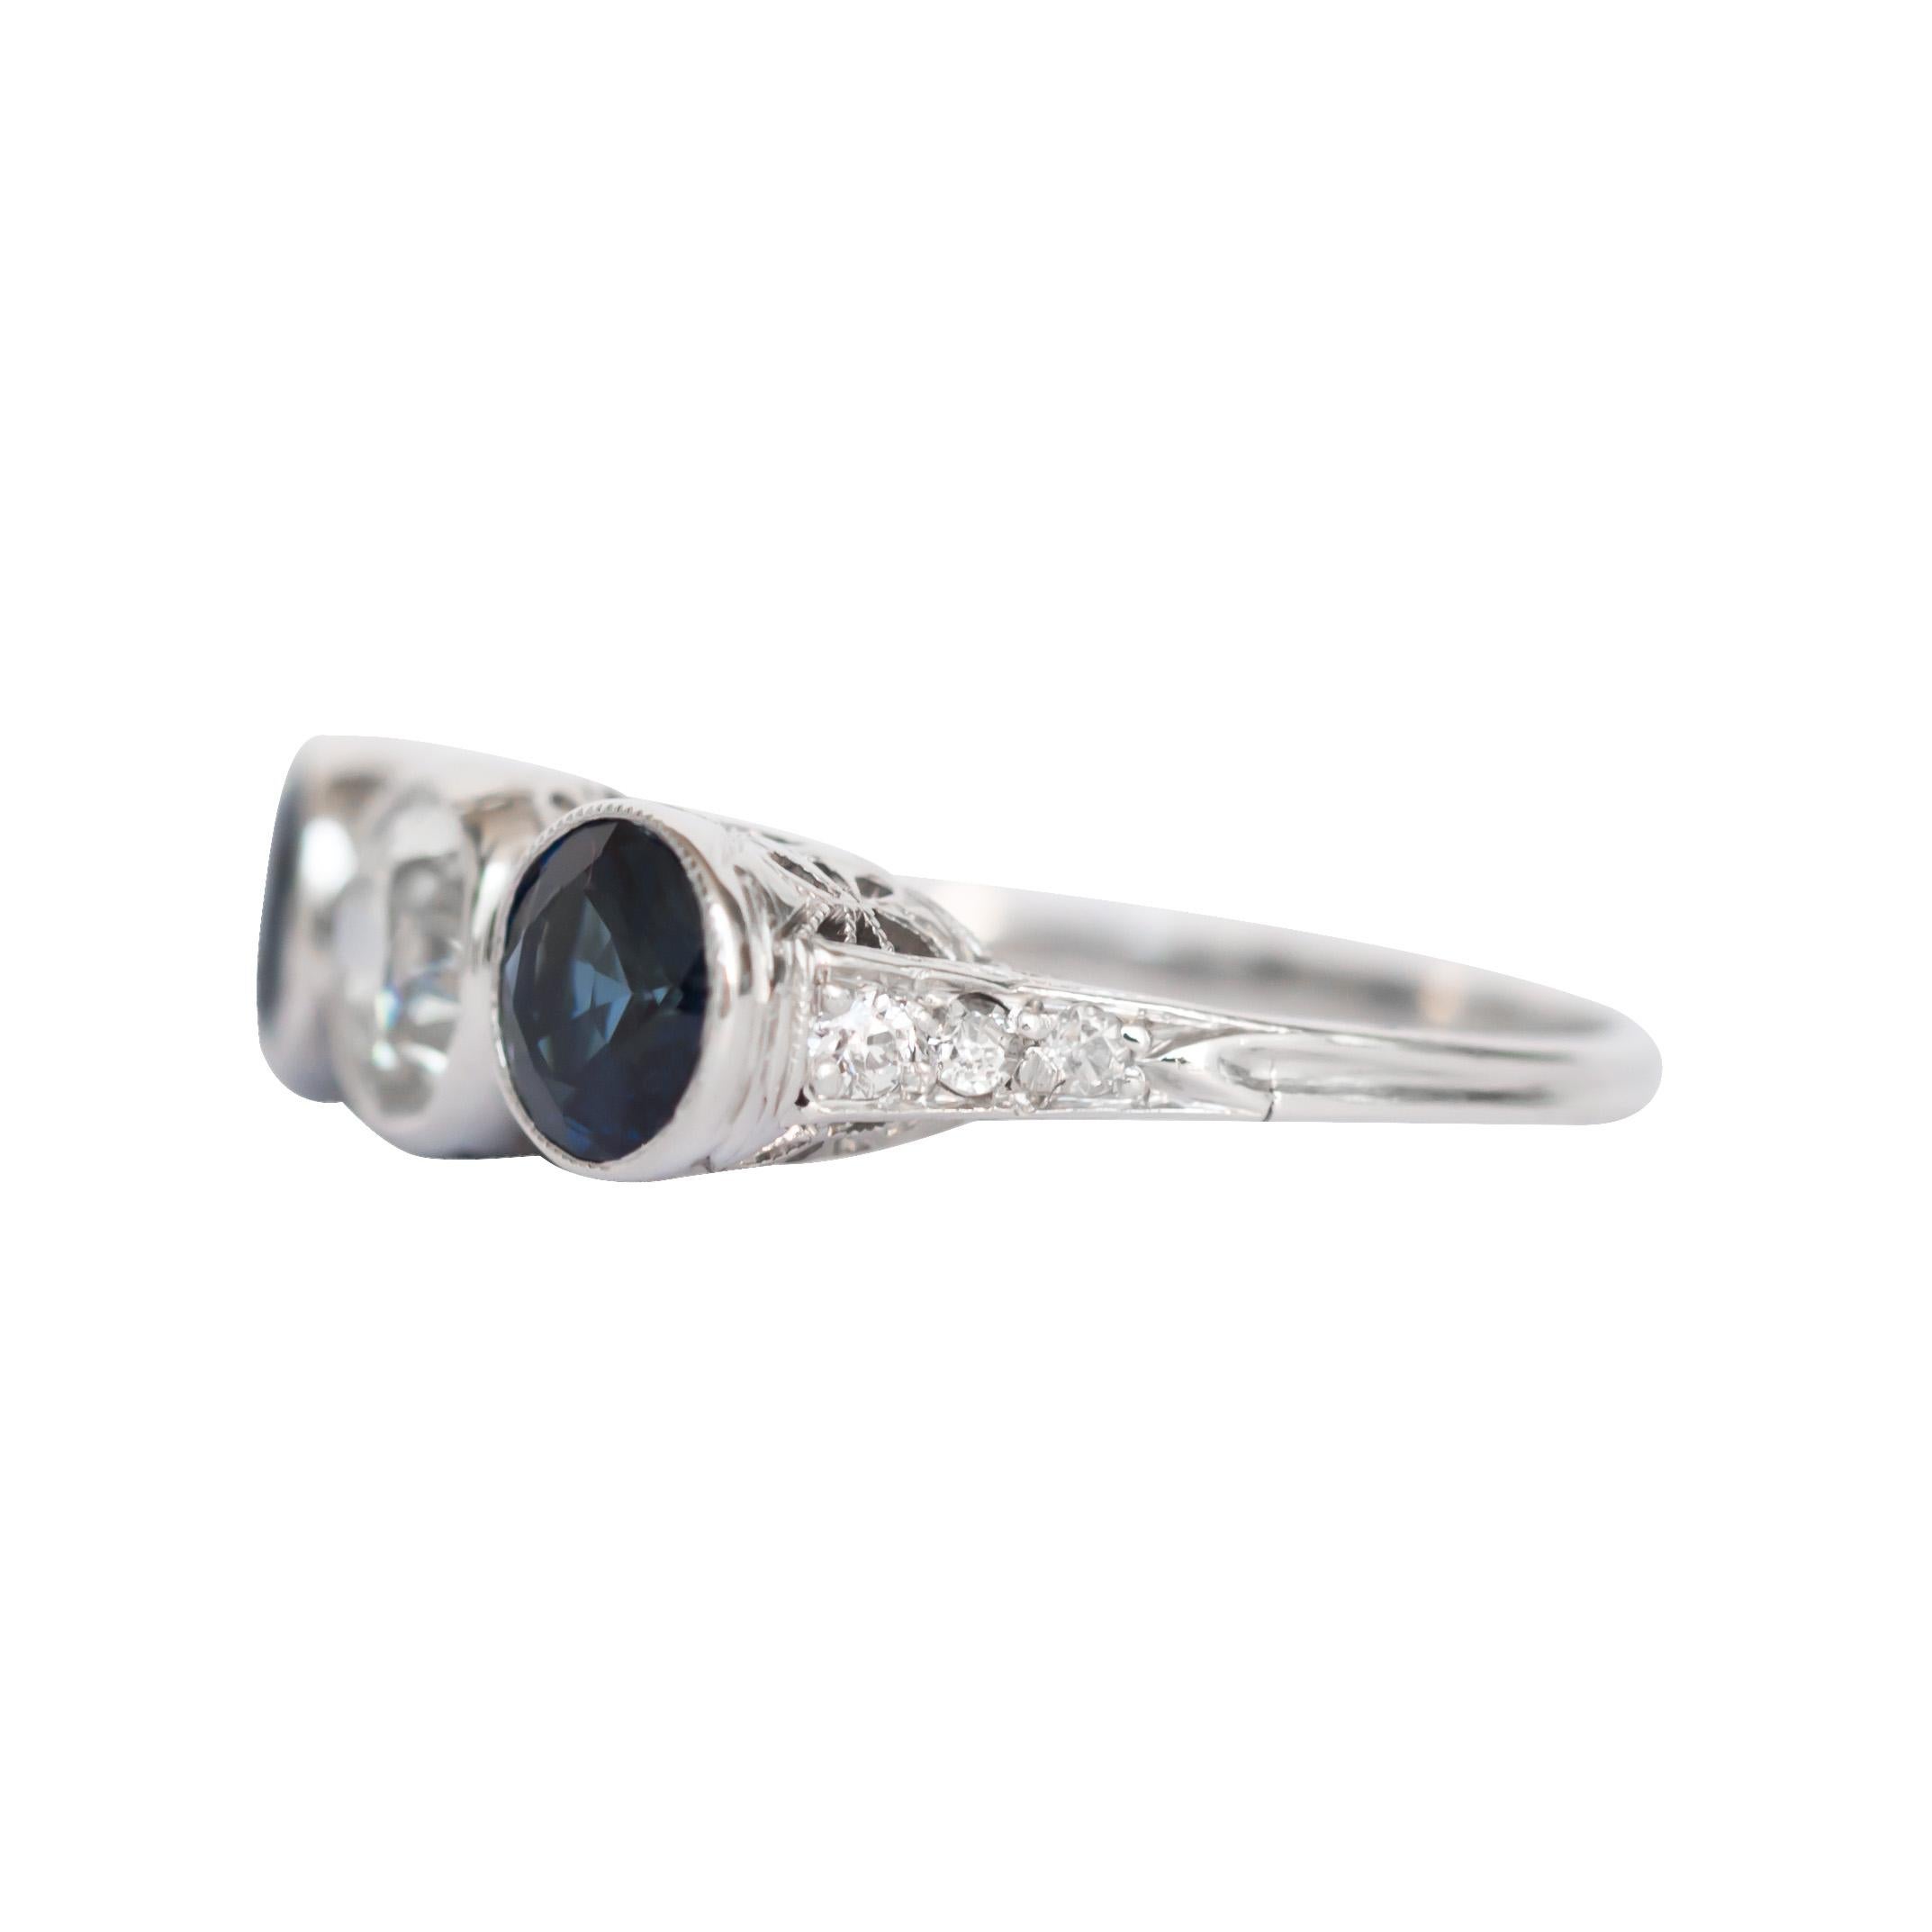 Ring Size: 6.5
Metal Type: Platinum 
Weight: 4.1 grams

Center Diamond Details
Shape: Old European Brilliant 
Carat Weight: .75 carat
Color: I
Clarity: VS1

Side Stone Details: 
Type: Natural Sapphire 
Shape: Round Brilliant 
Total Carat Weight: